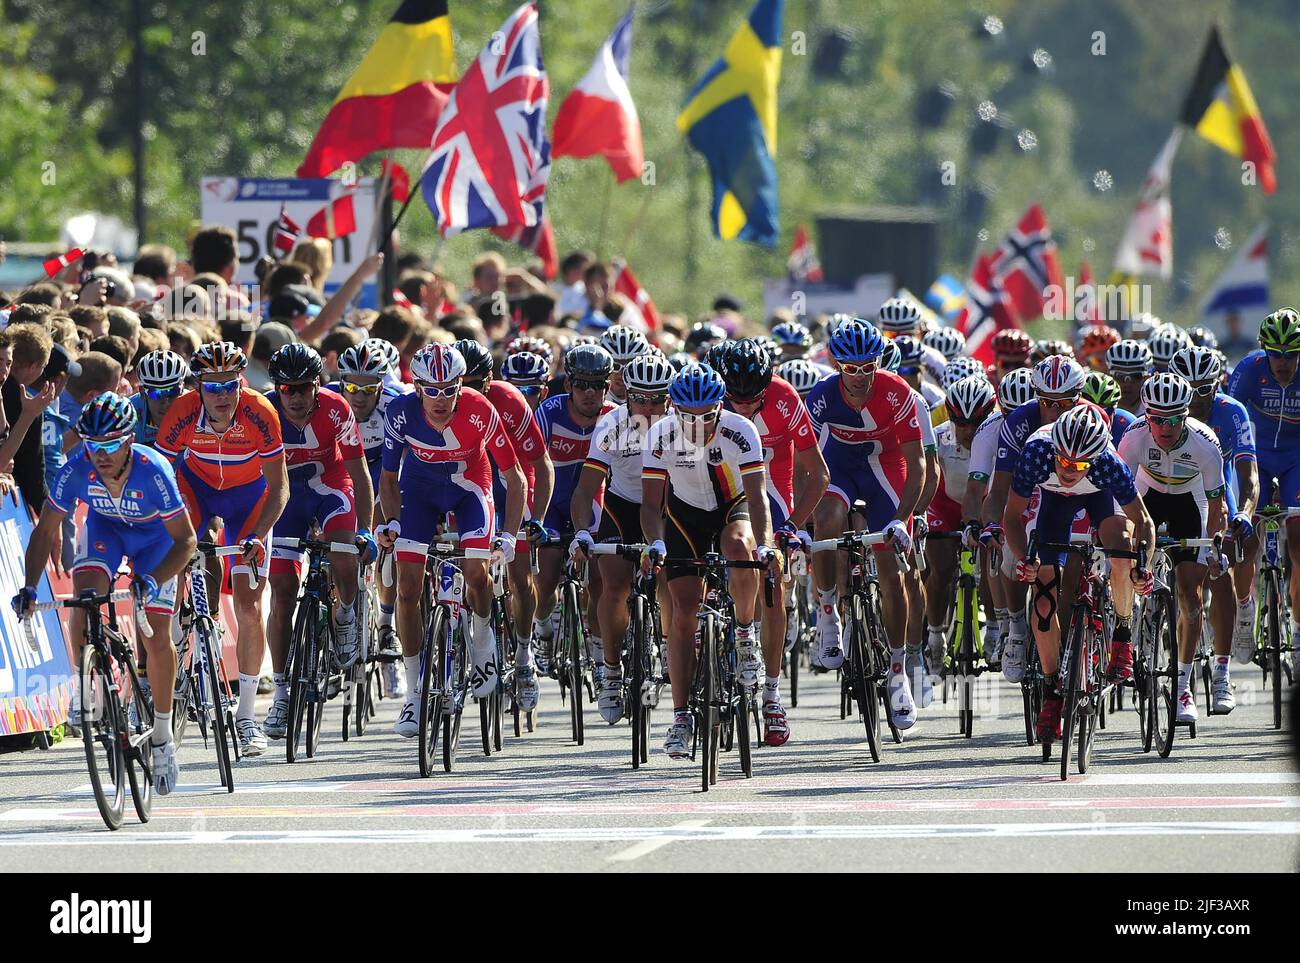 File photo dated 25-09-2011 of Great Britain's Bradley Wiggins (left of centre with Union Jack on helmet) with Mark Cavendish on his left and David Millar (blue helmet) as they lead the field in the Men's Elite Road race during Day Seven of the UCI Road Race World Championships, Copenhagen. Originally due to host the Grand Depart last year before the Covid-19 pandemic intervened, 12 months later Denmark will be the starting point for a 3,328km race that will then head across the north of France, into the Alps and then to the Pyrenees before the traditional finish in Paris. Issue date: Wednesda Stock Photo